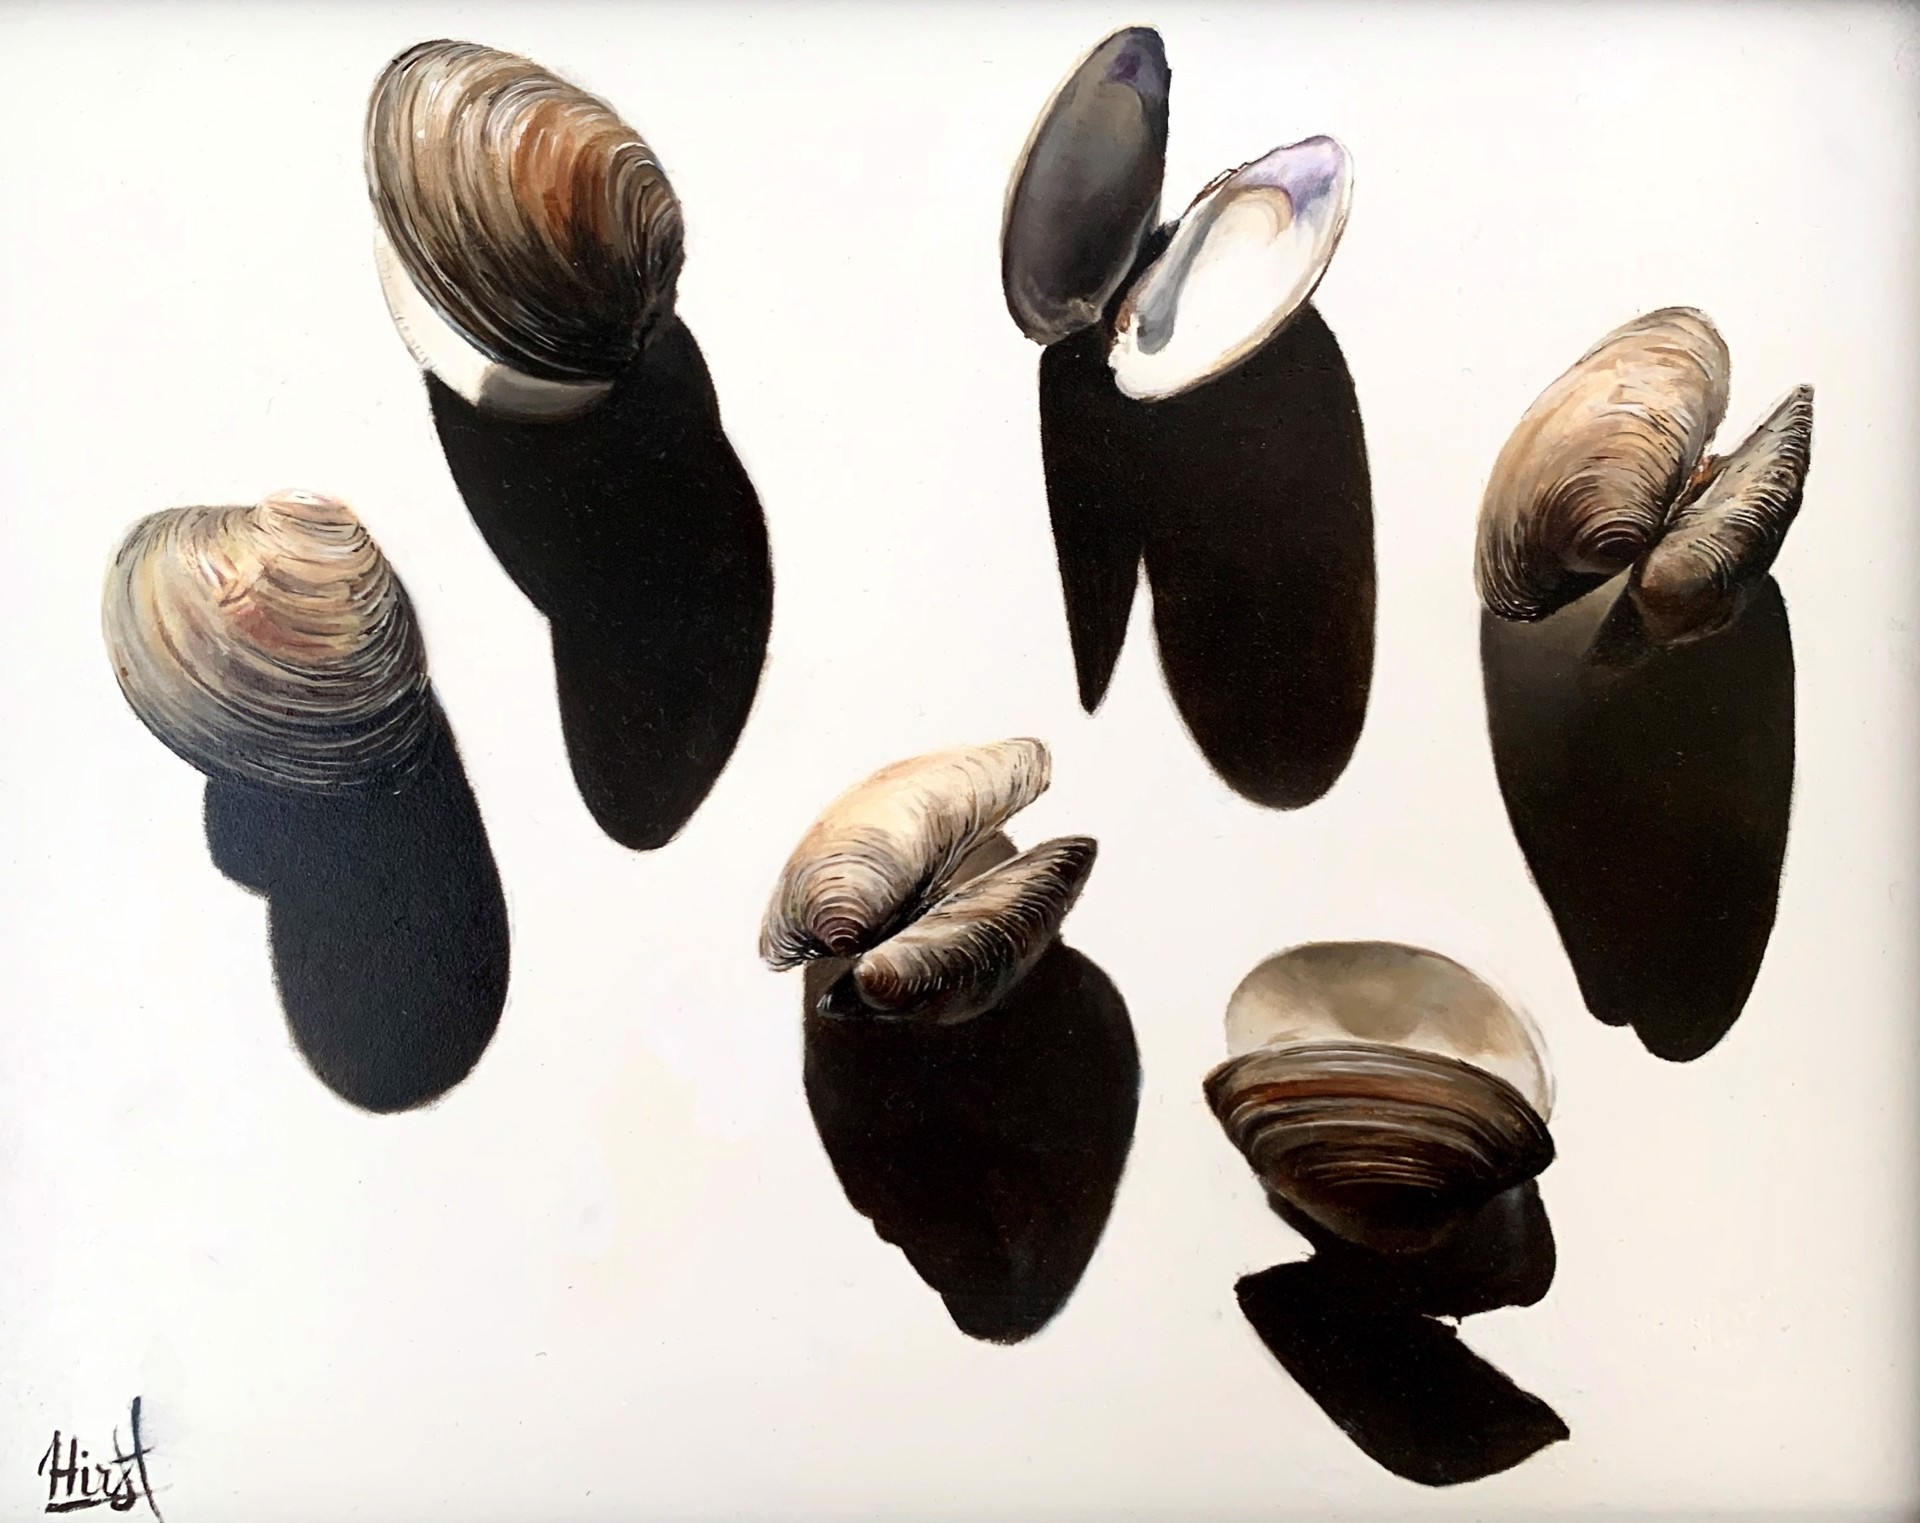 Clam Shells and Their Shadows by Emma Hirst